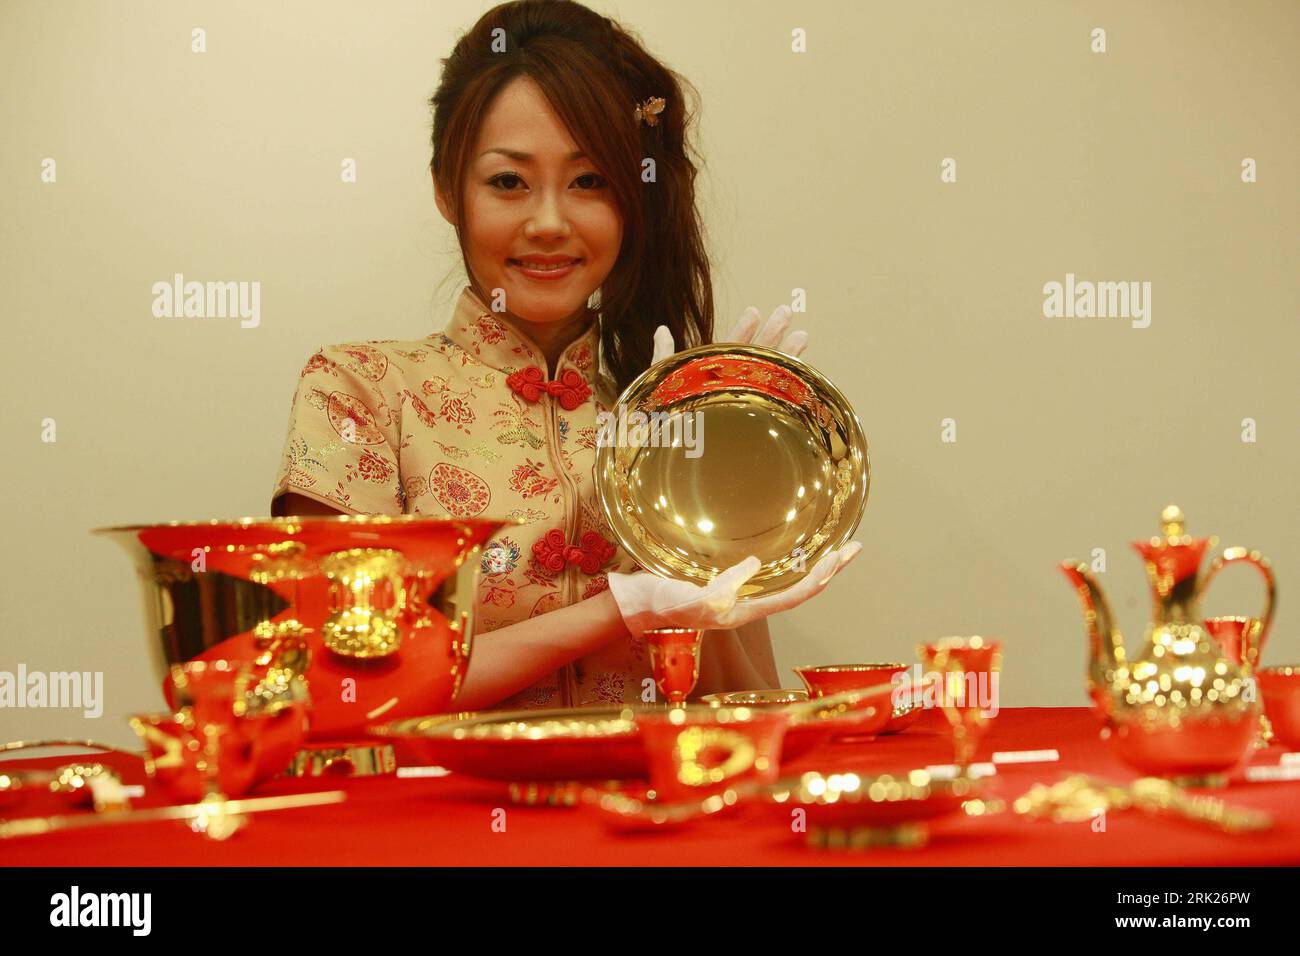 Bildnummer: 53151708  Datum: 02.09.2008  Copyright: imago/Xinhua  A staff member of Ginza Tanaka shows one piece of 24K gold Chinese-style dishware set in Ginza, Tokyo, capital of Japan, Sept. 2, 2008. The set was released by Ginza Tanaka including 13 kinds, 31 pieces dishwares such as cups, plates, bowls and chopsticks on Tuesday kbdig  einer Personal Mitglied of Ginza der Set war released by Ginza Tanaka namentlich 13 kinds, 31 Stücke dishwares solchen als cups, plates, Schüsseln und Stäbchen auf Tuesday und Geschirr quer    Bildnummer 53151708 Date 02 09 2008 Copyright Imago XINHUA a Staff Stock Photo